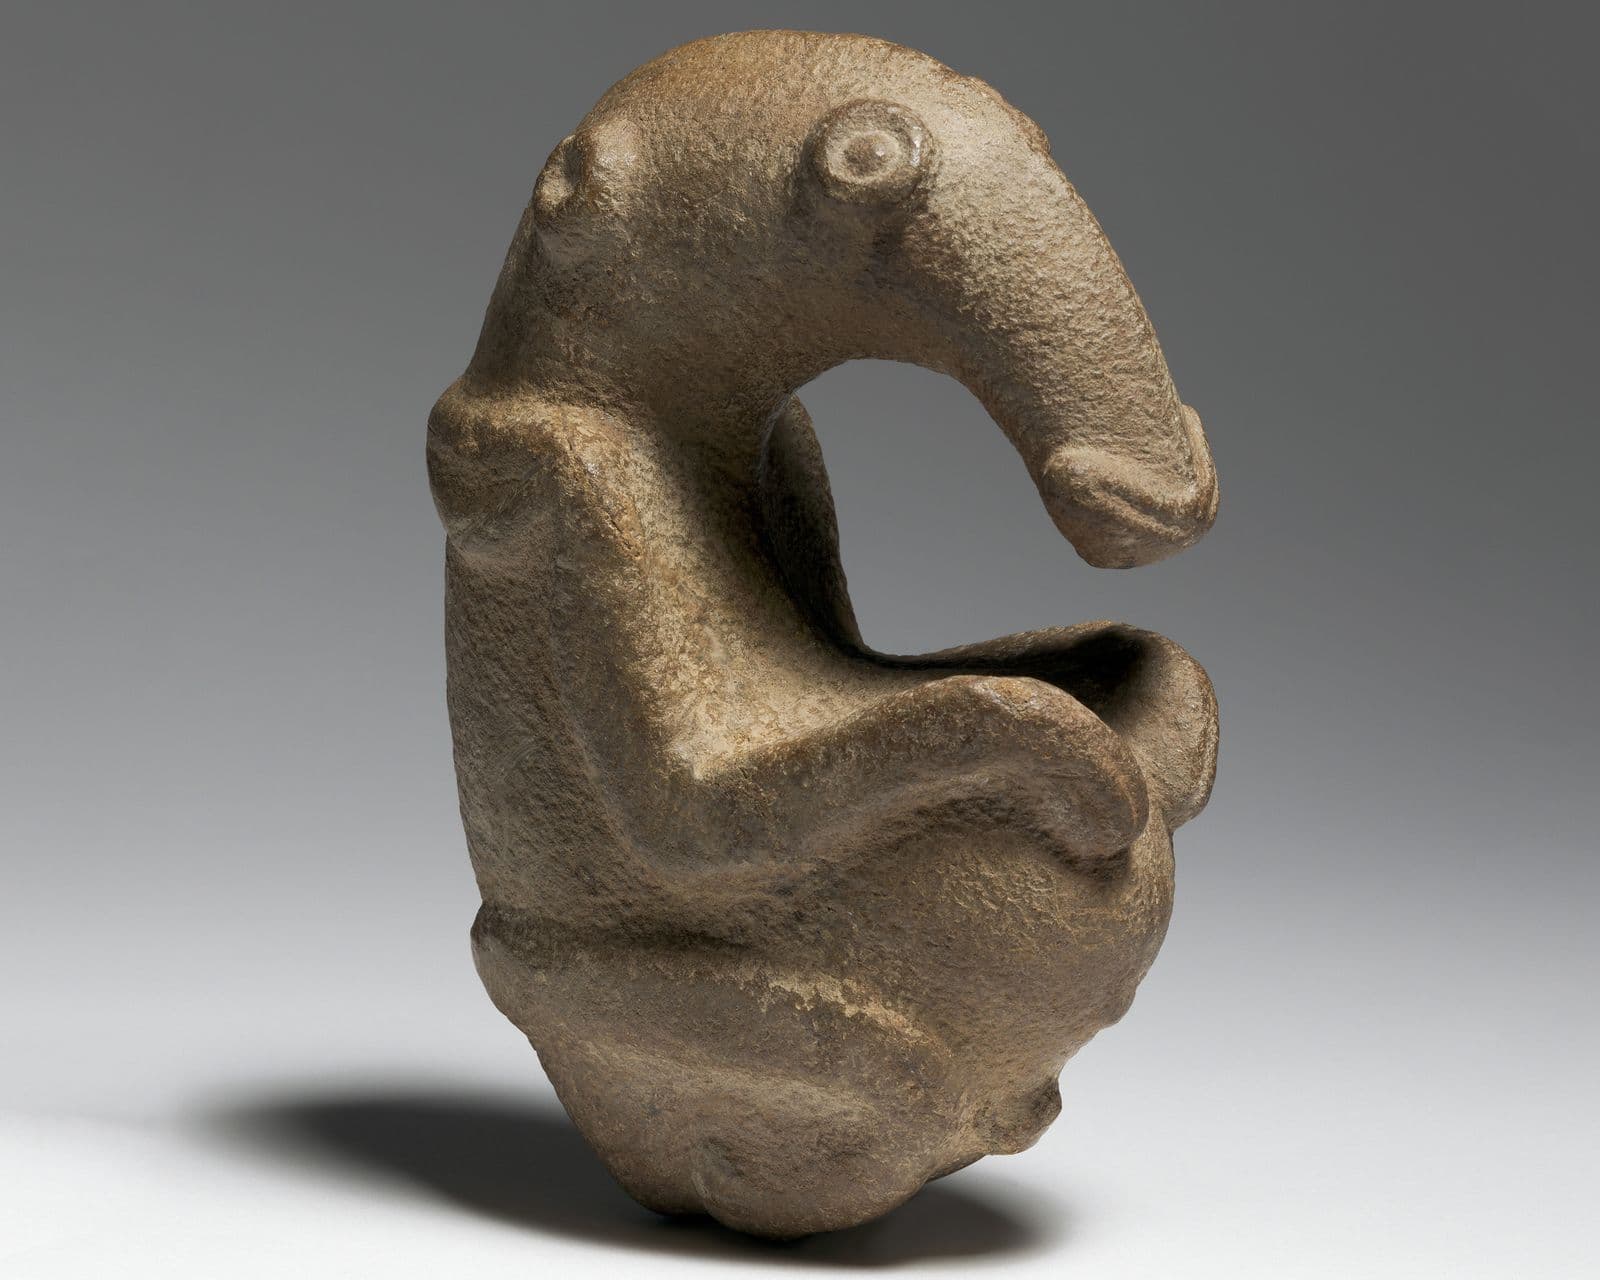 A small prehistoric stone carved object in the form of an animal the resembles a long-beaked echidna.